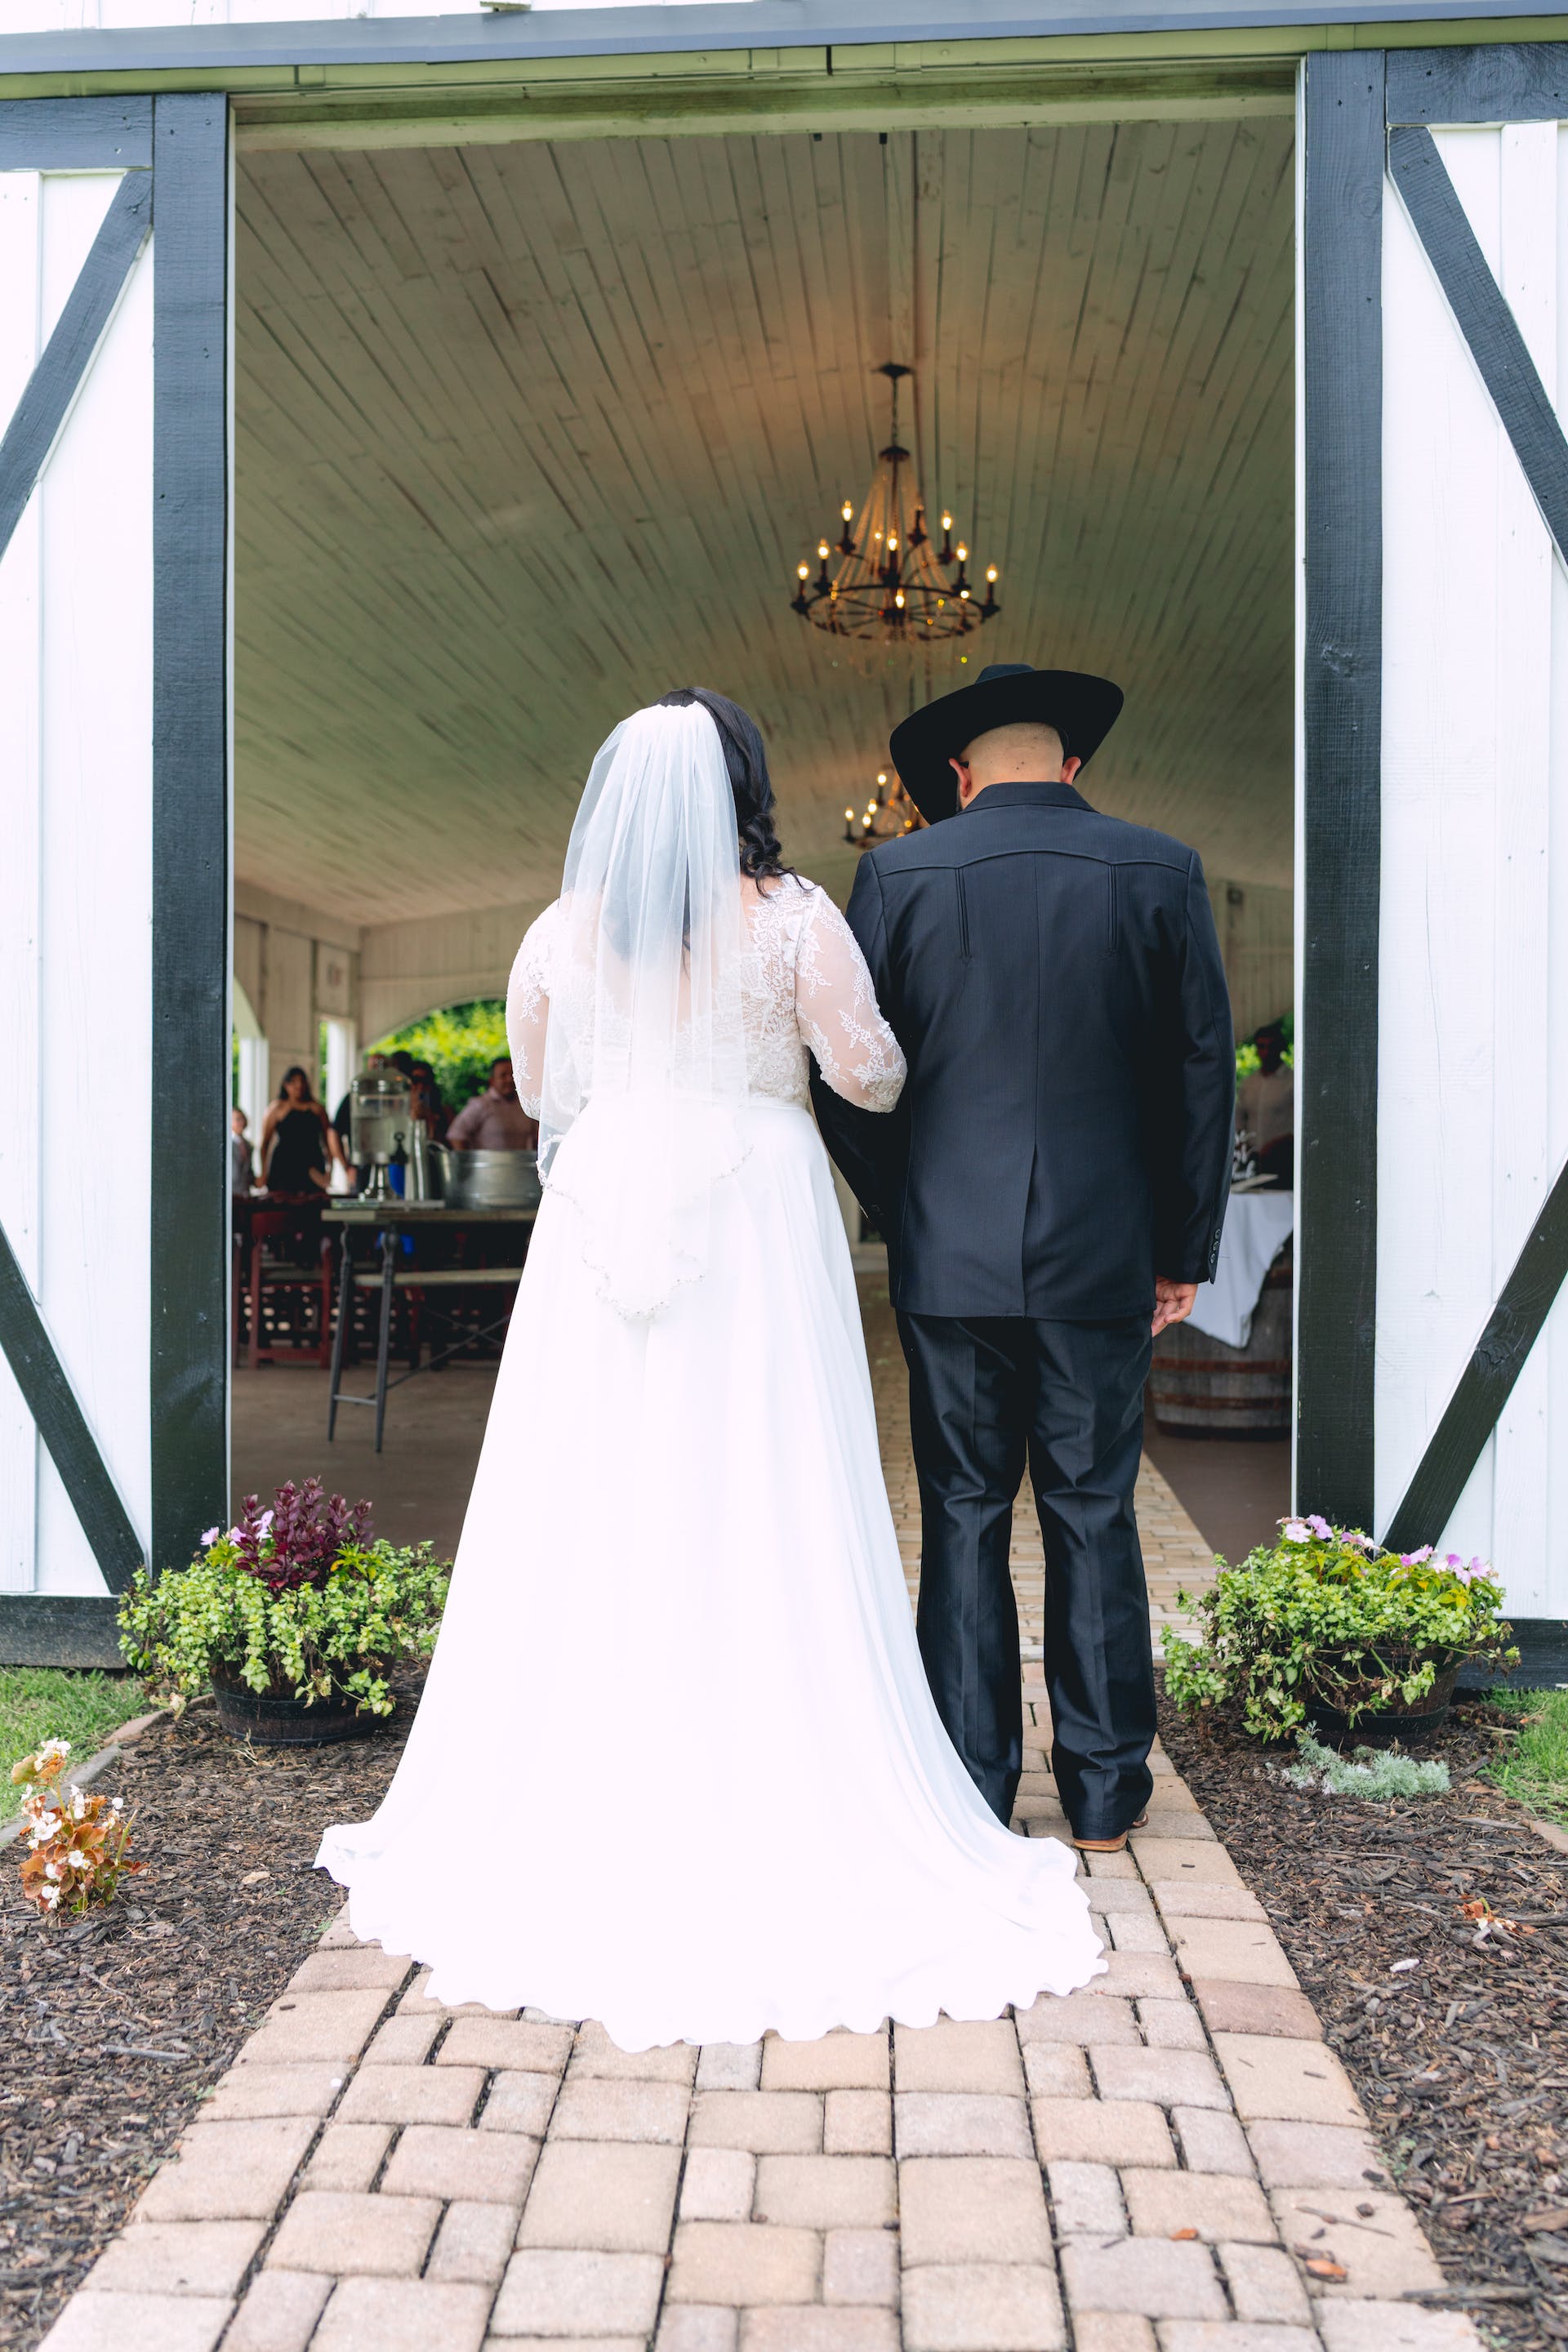 A bride walking down the aisle with a man | Source: Pexels